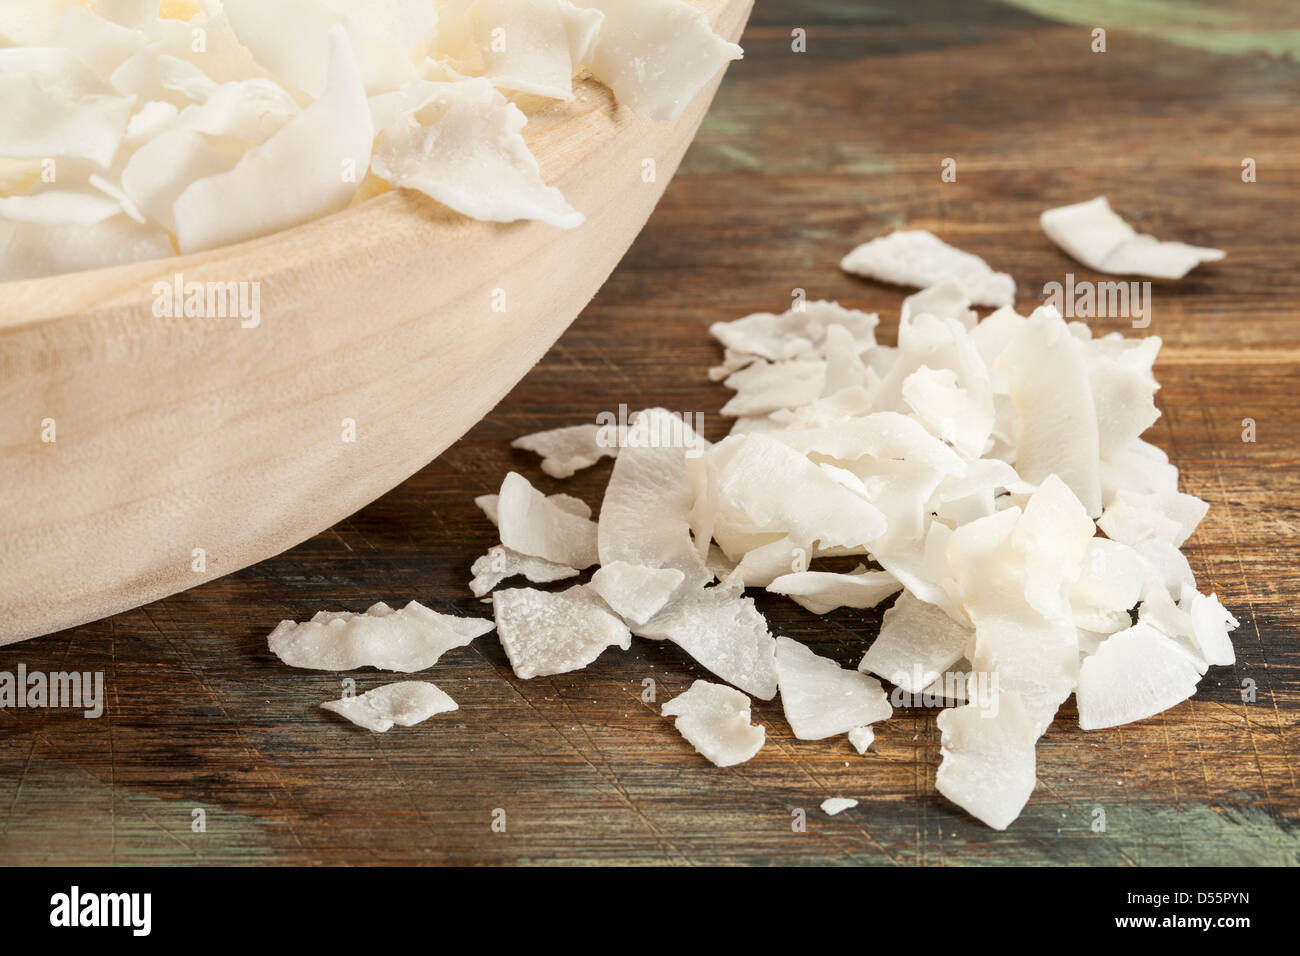 flakes of shredded coconut on a rustic wooden table and in a bowl Stock Photo